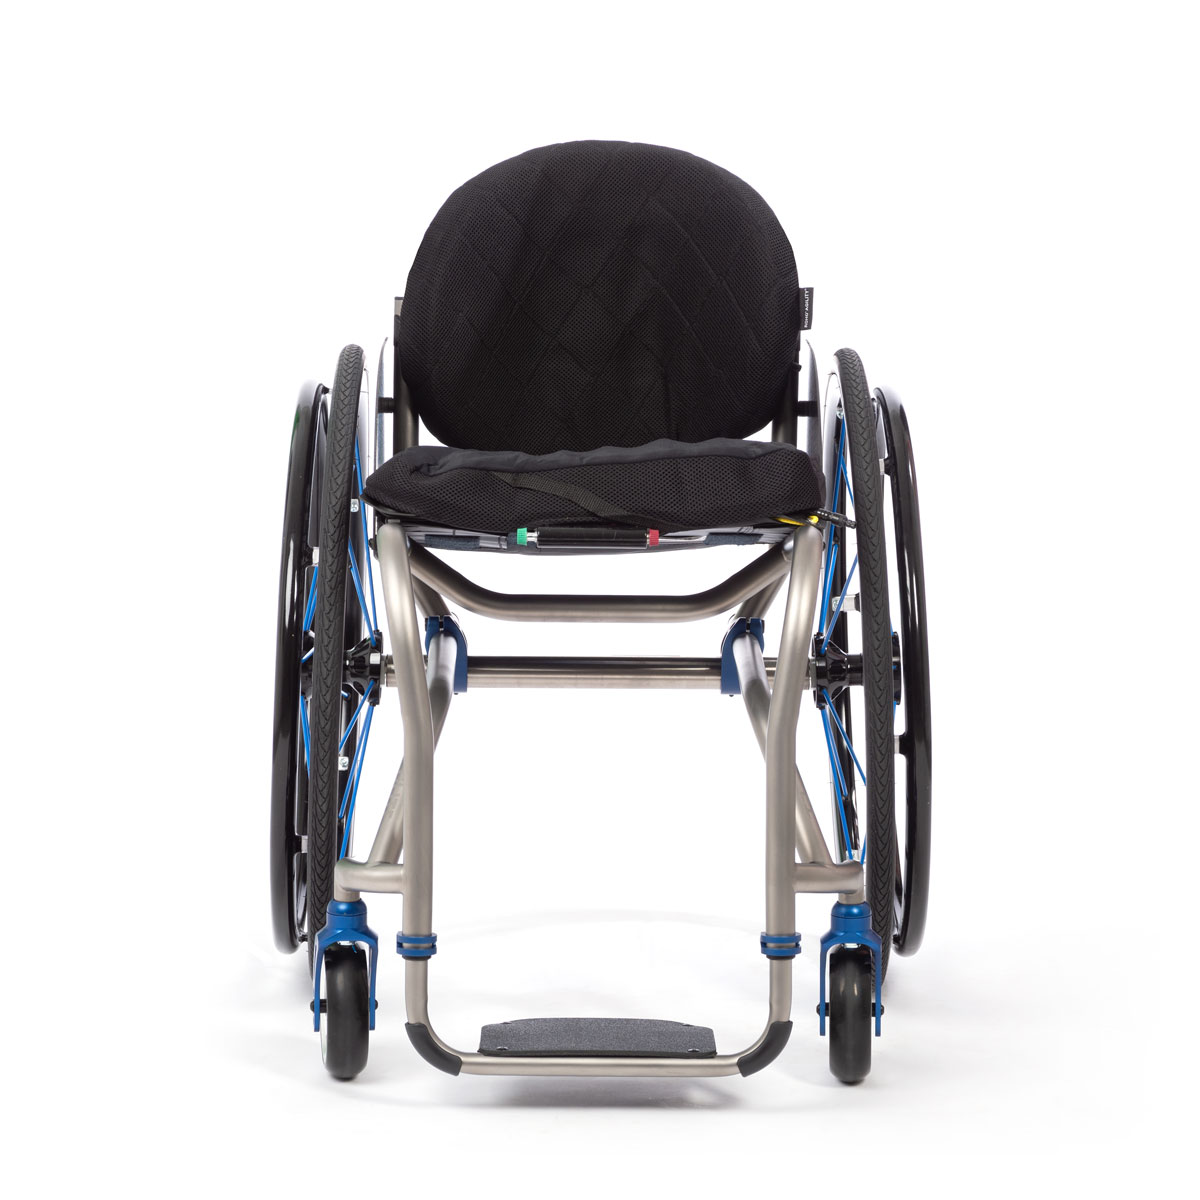 TiLite TR active wheelchair with hard shell backrest